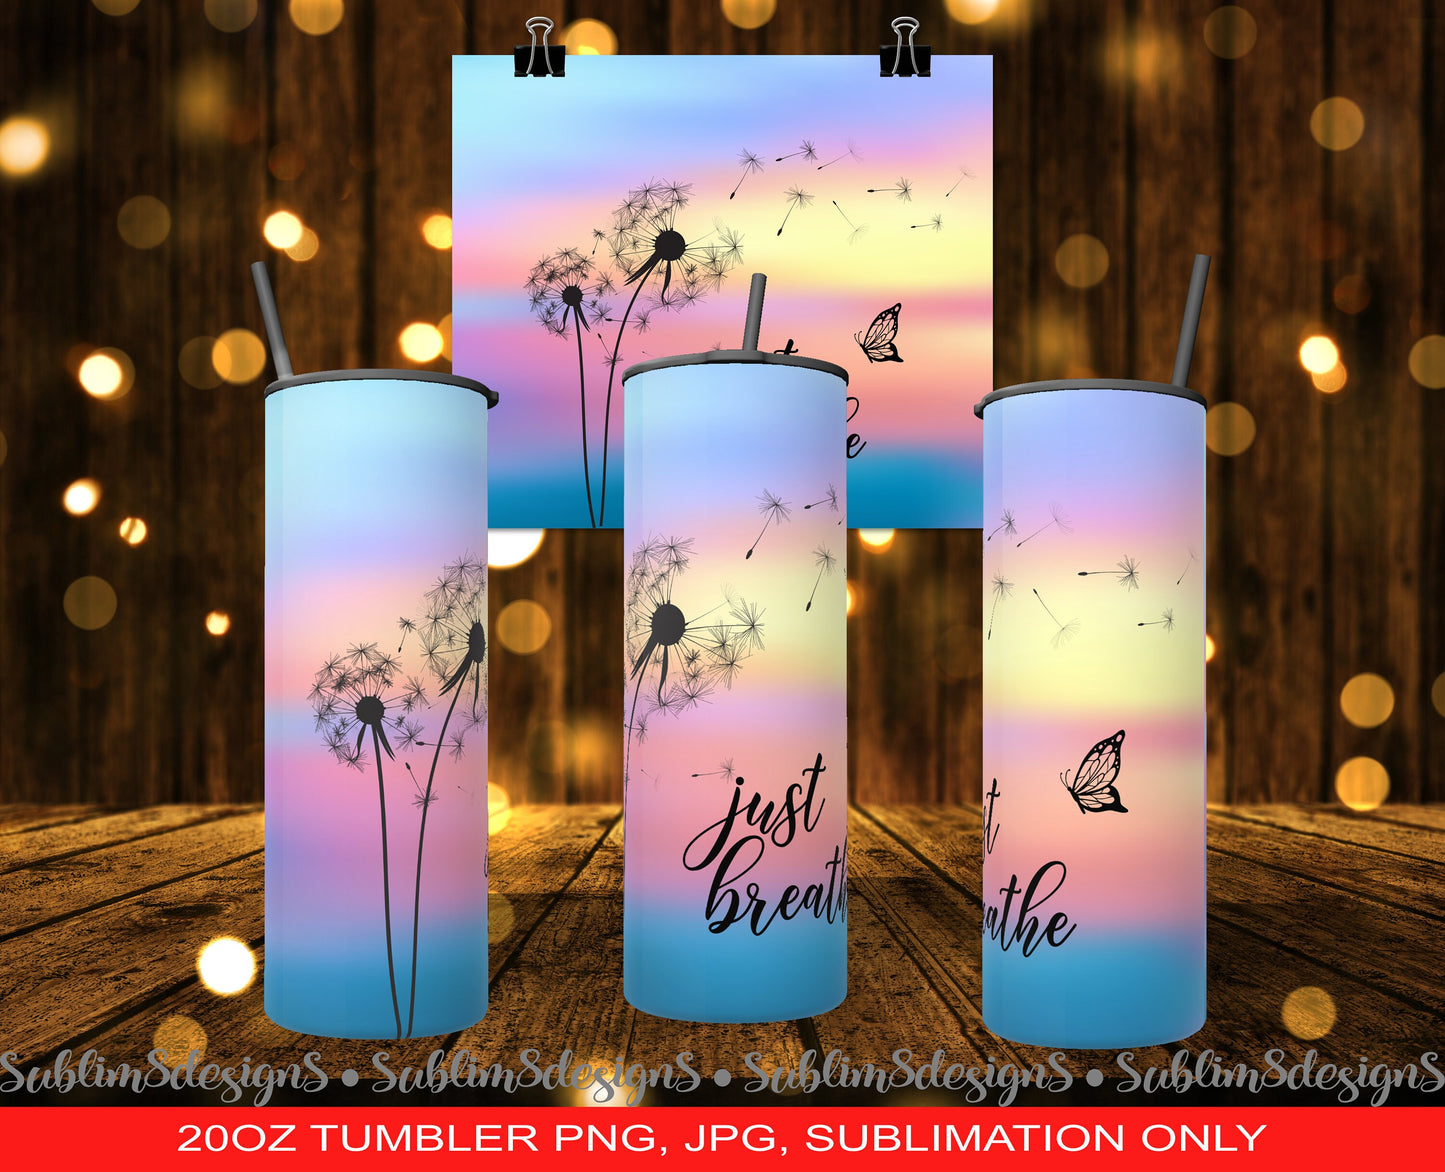 Just Breathe Sublimation Bundle T-shirt, Tumbler and Mug Designs PNG and JPG ONLY